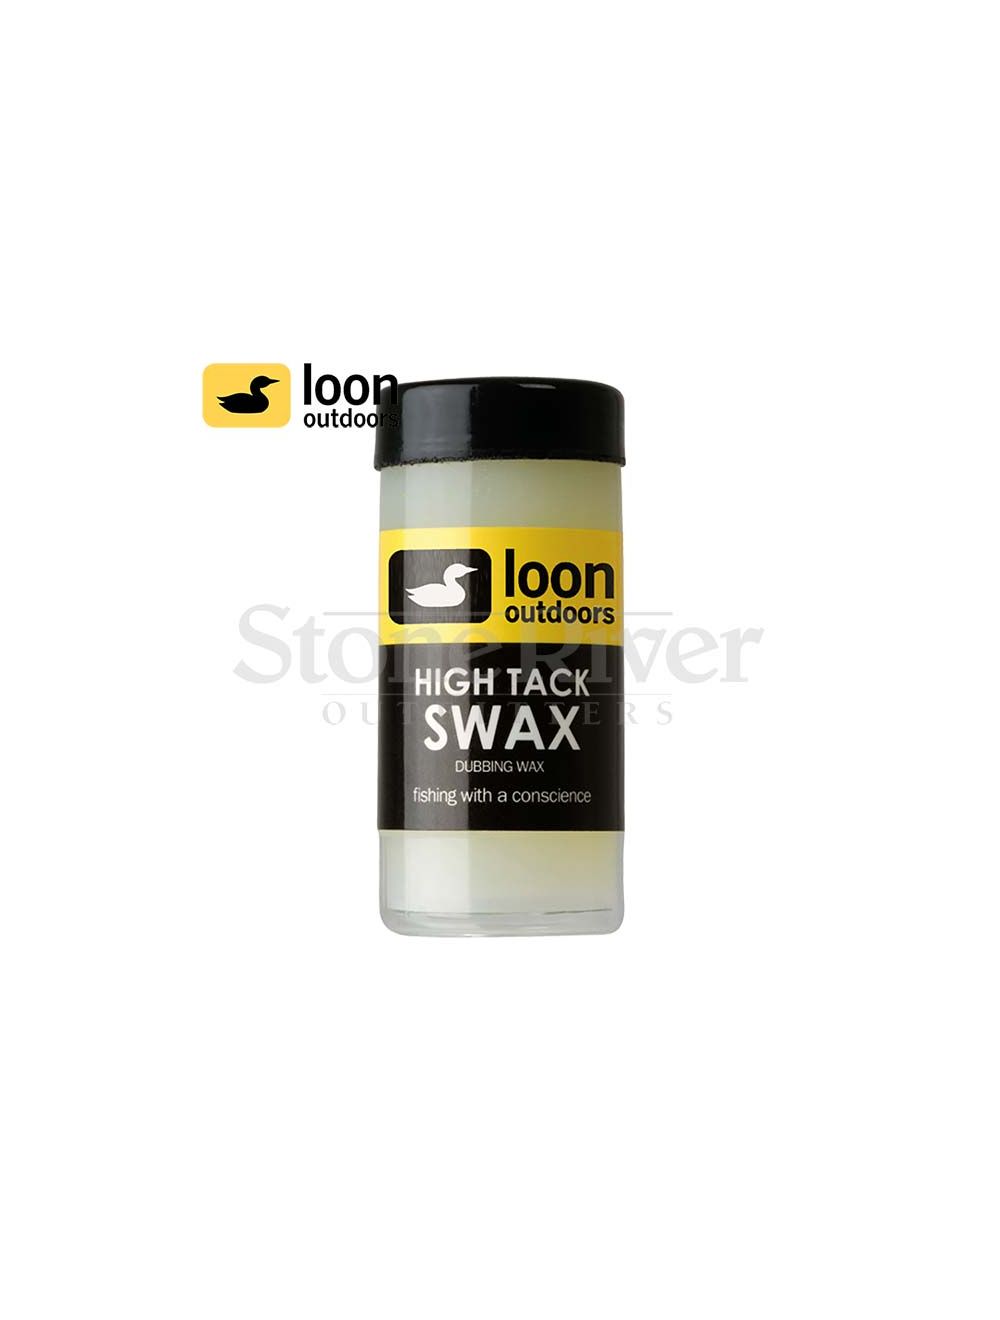 Loon Outdoors High Tack Swax Dubbing Wax Large Flies Options F0085 for sale online